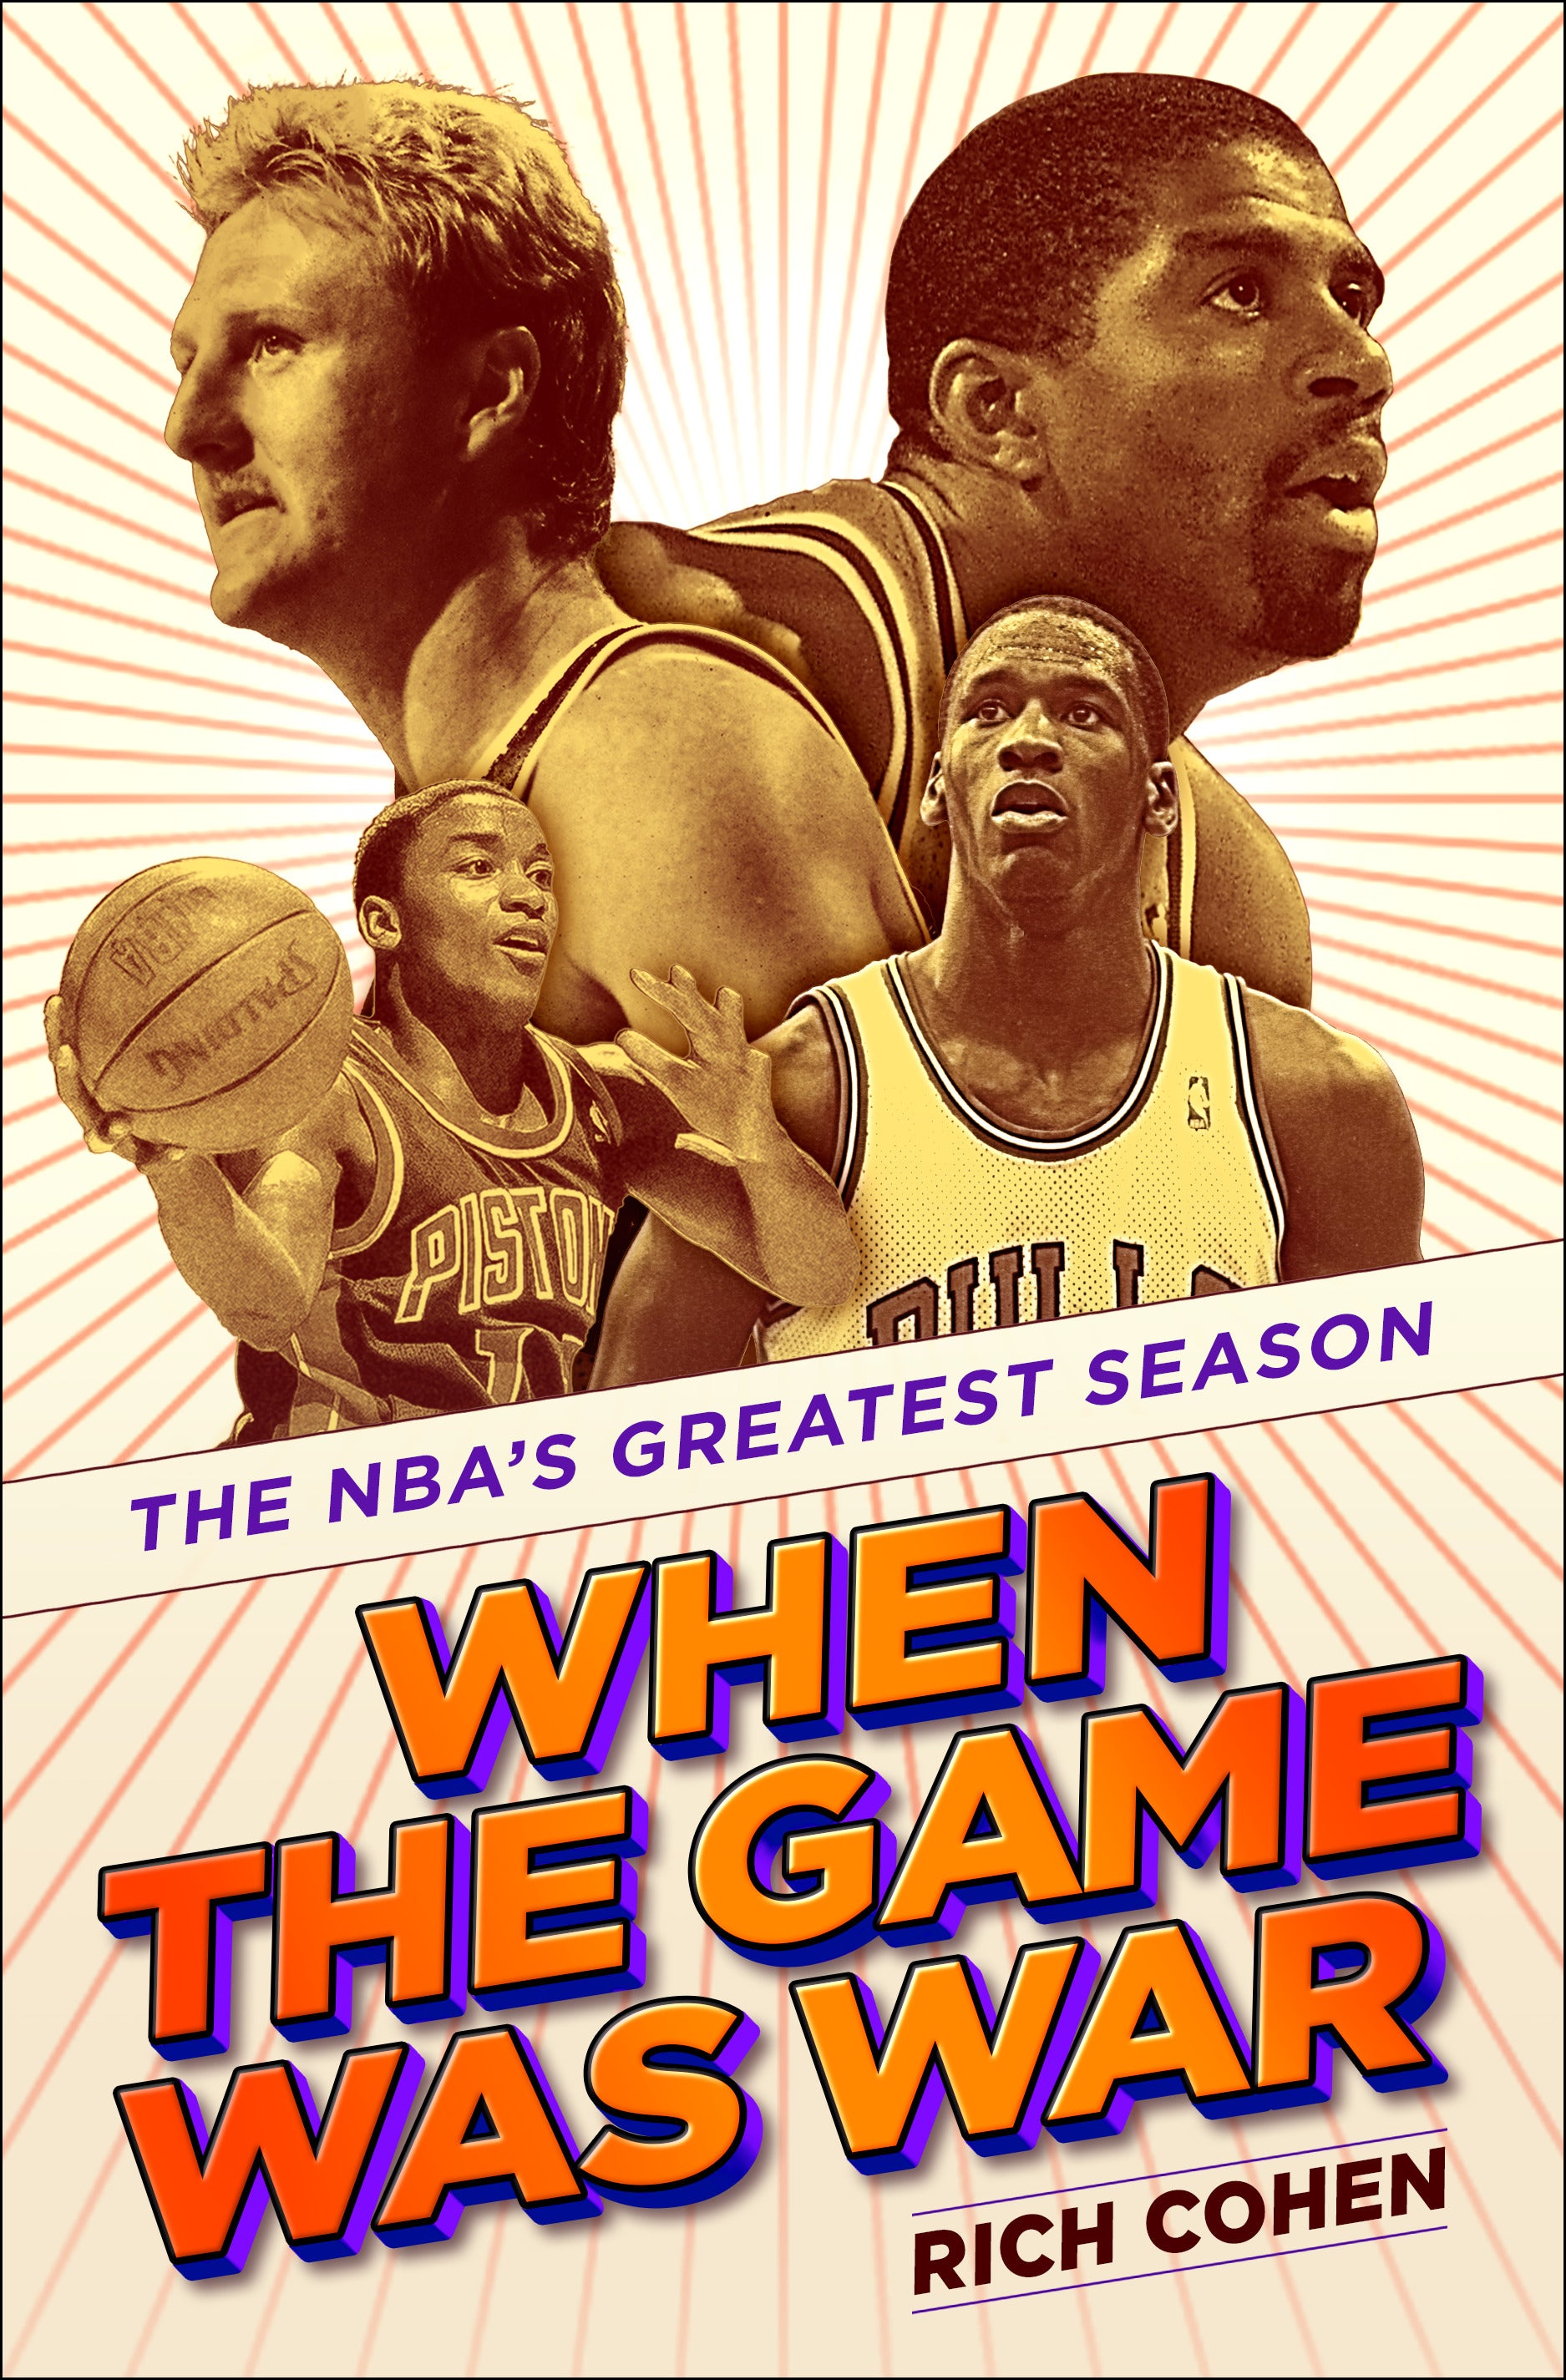 When the Game was War [Autographed Book]